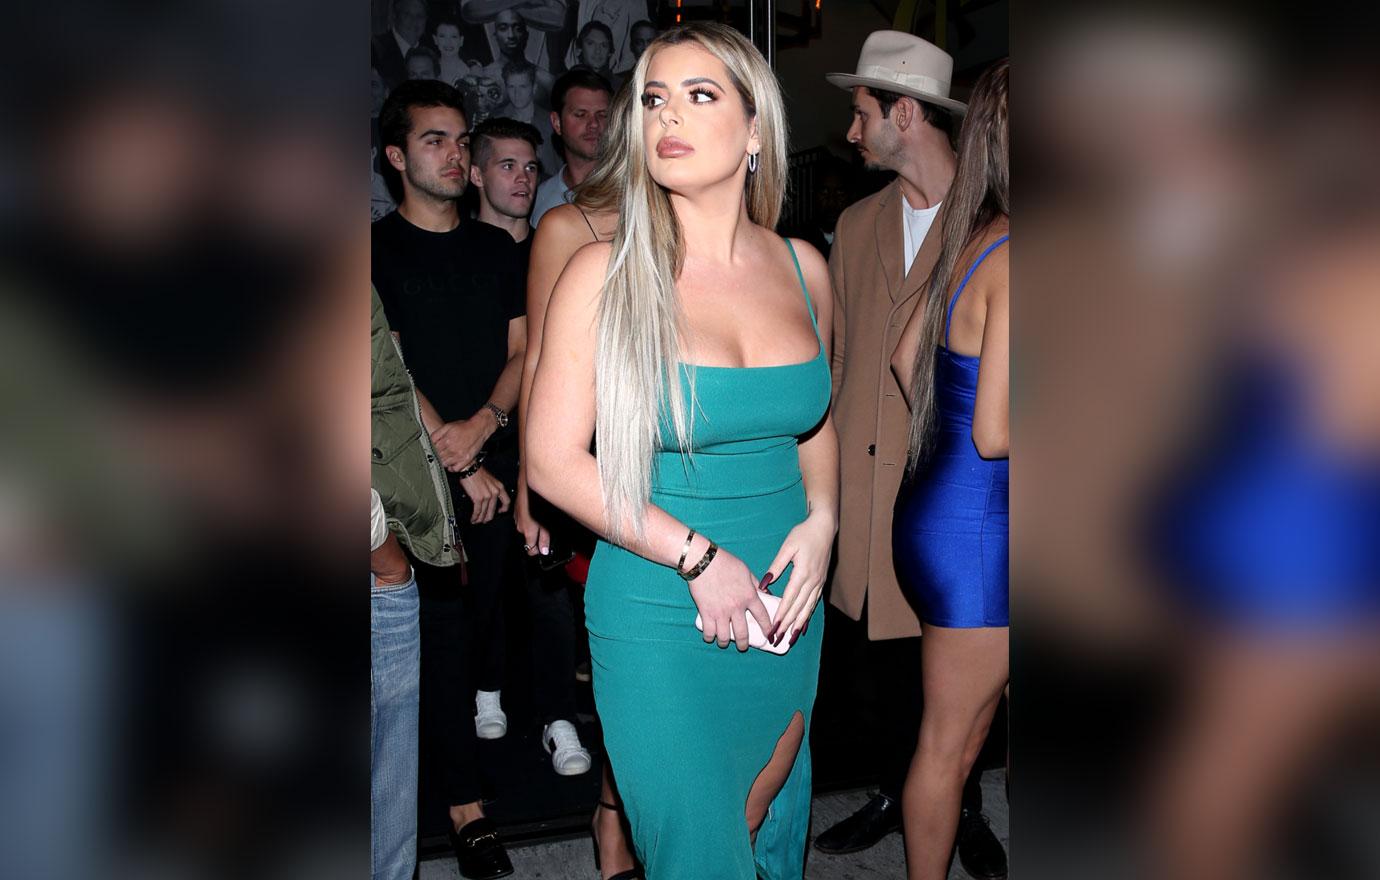 Brielle Biermann Flaunts Cleavage After Naked Video Scandal